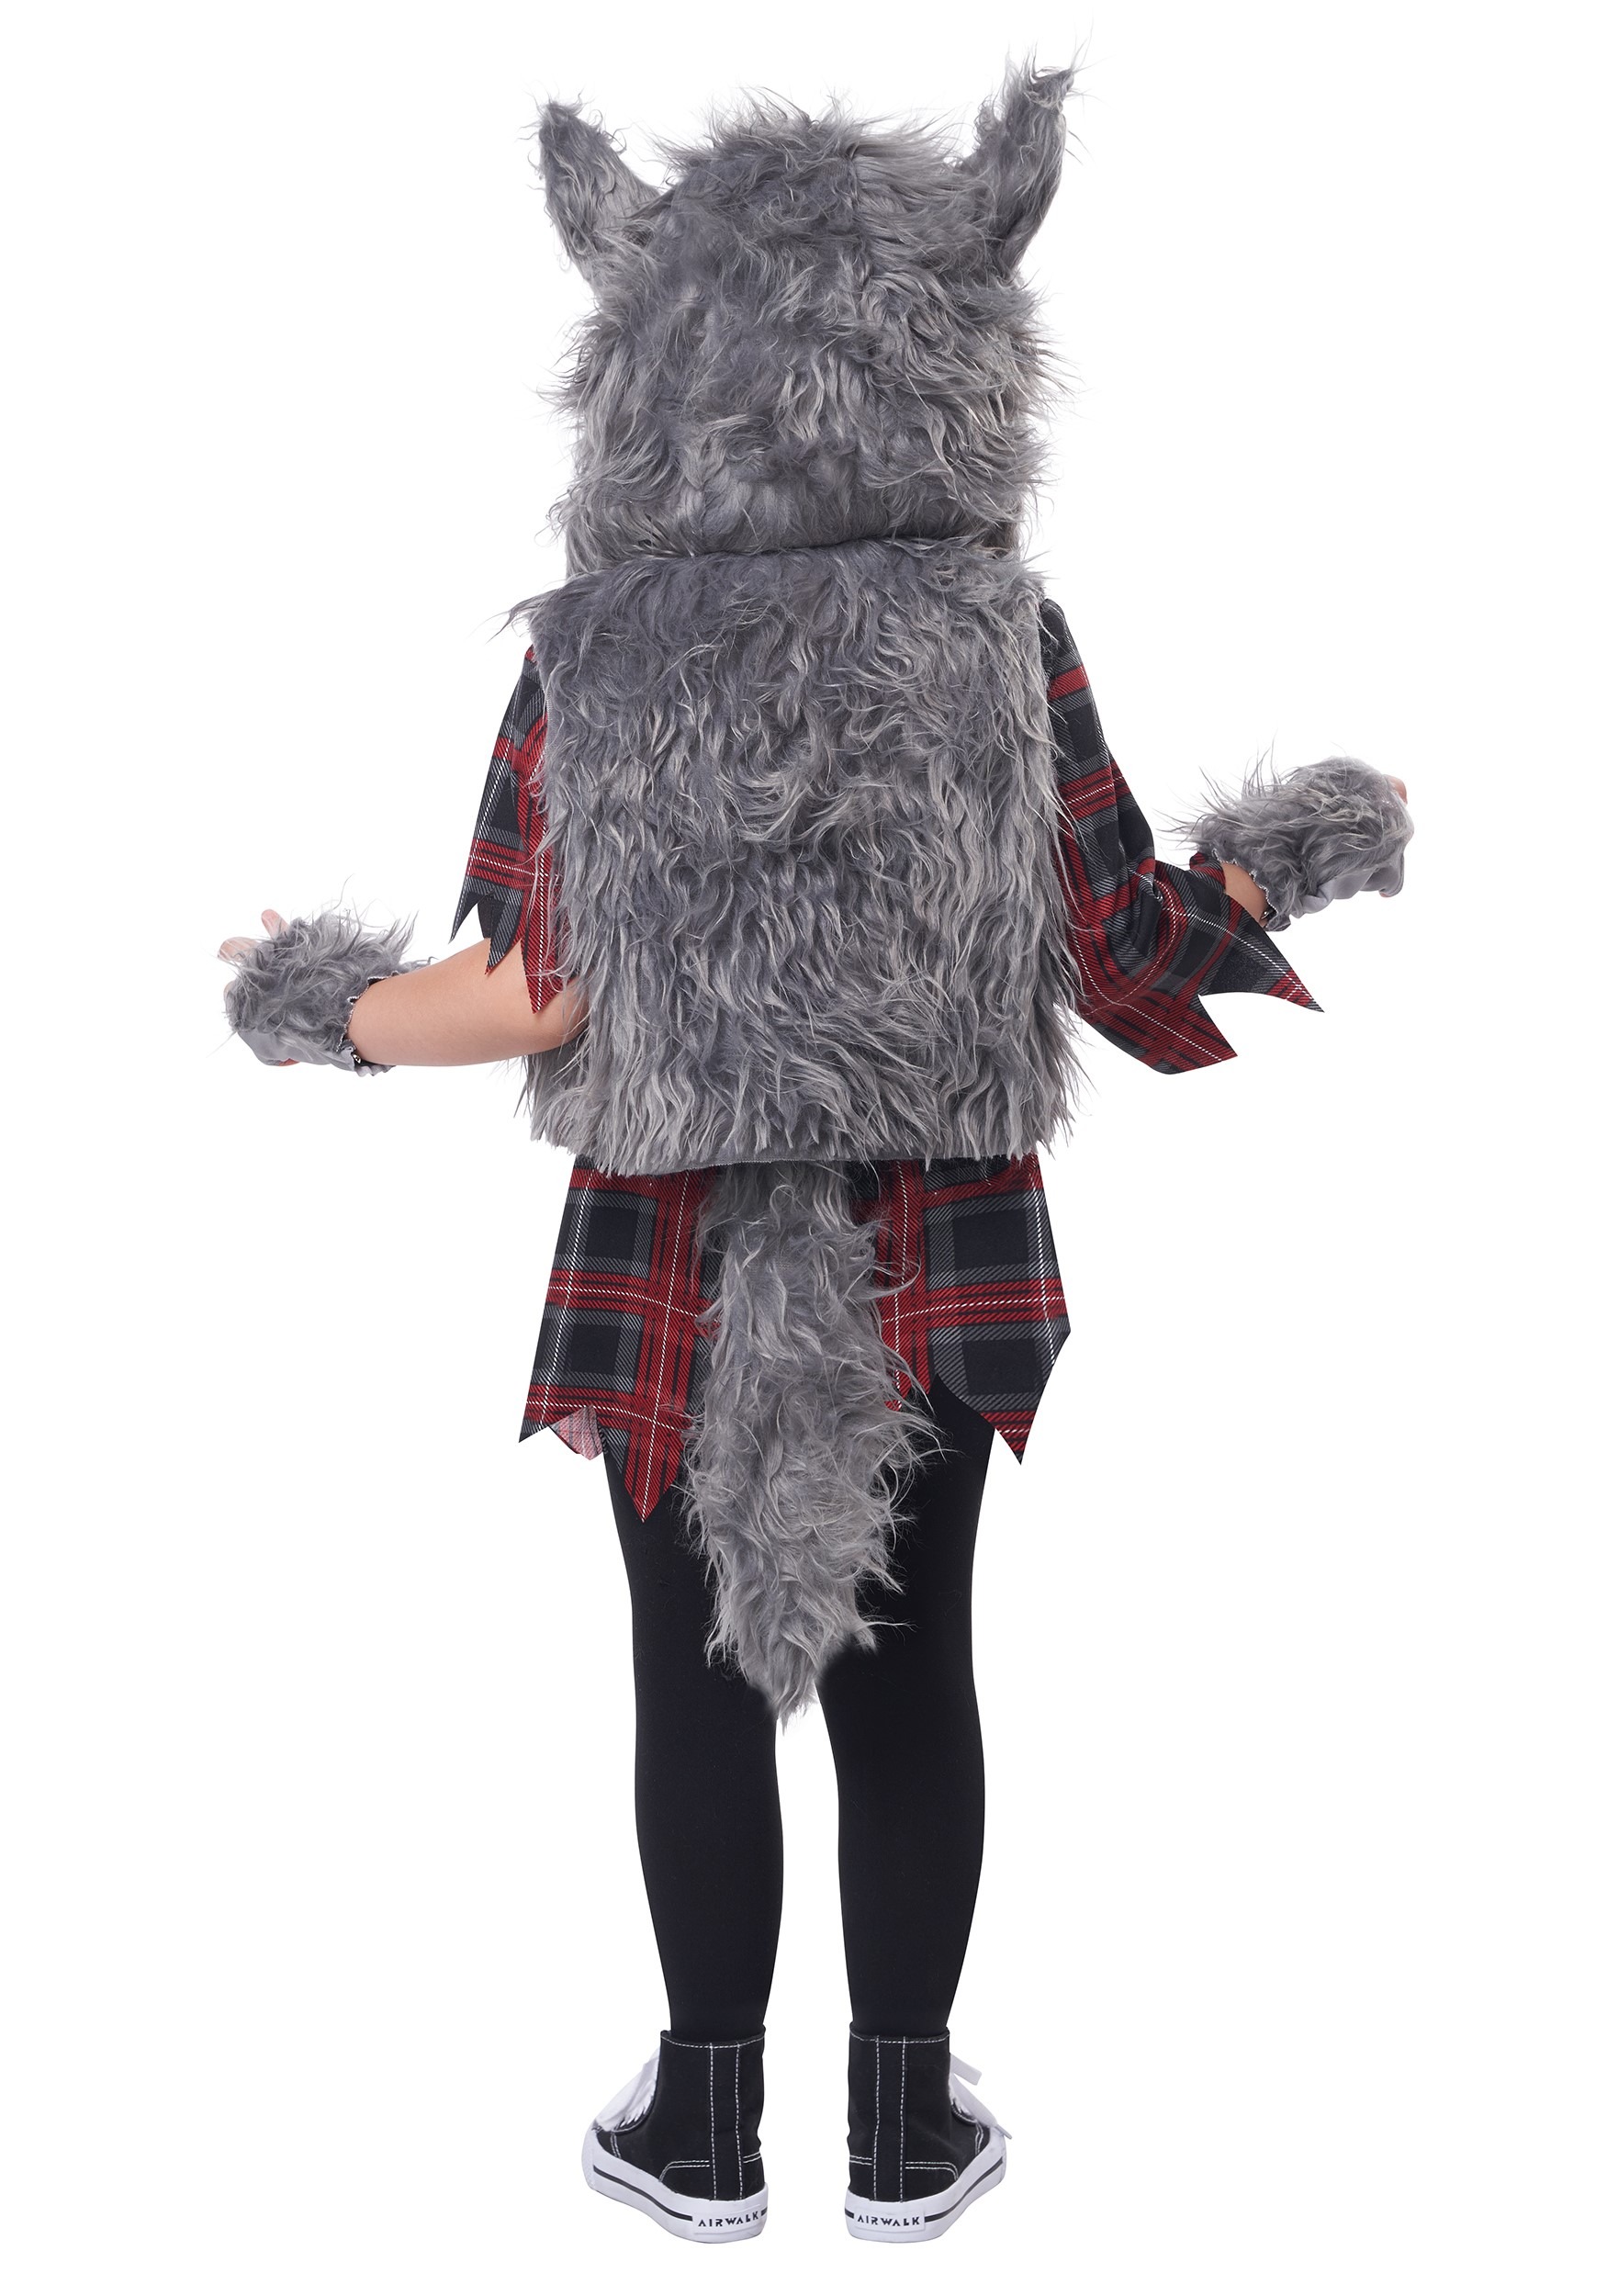 Wee-Wolf Girl's Costume